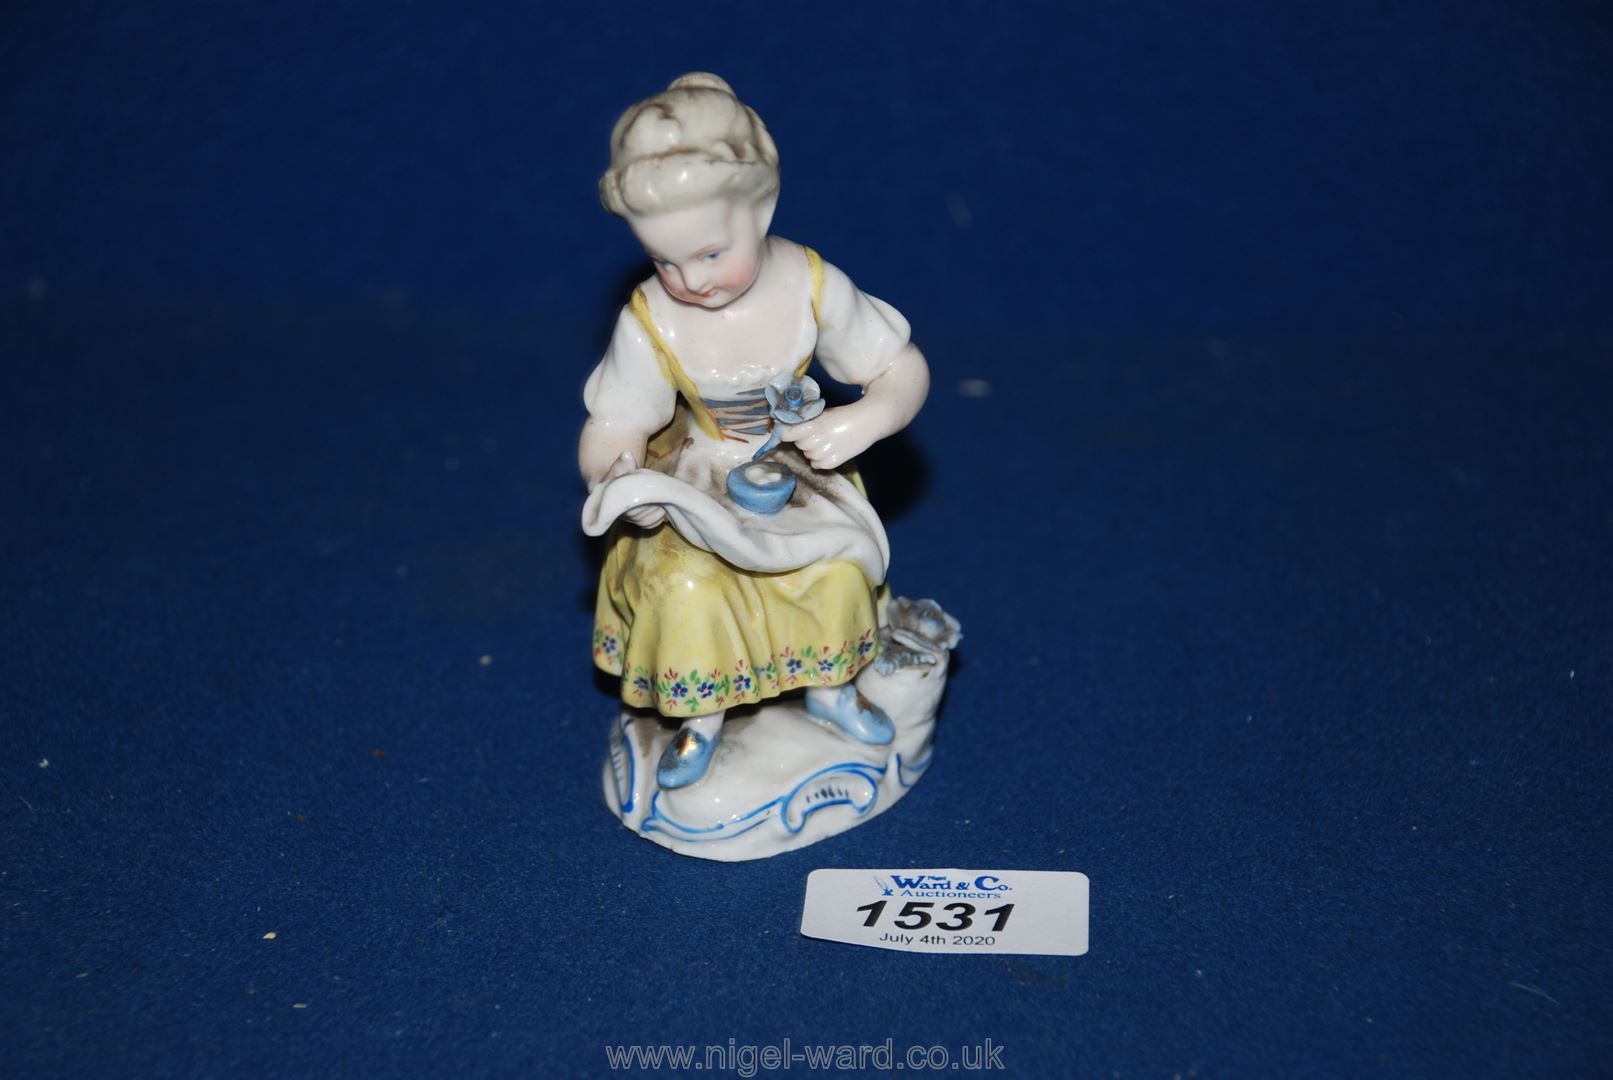 A small Sitzendorf porcelain figure of a young girl 4 1/4" tall.